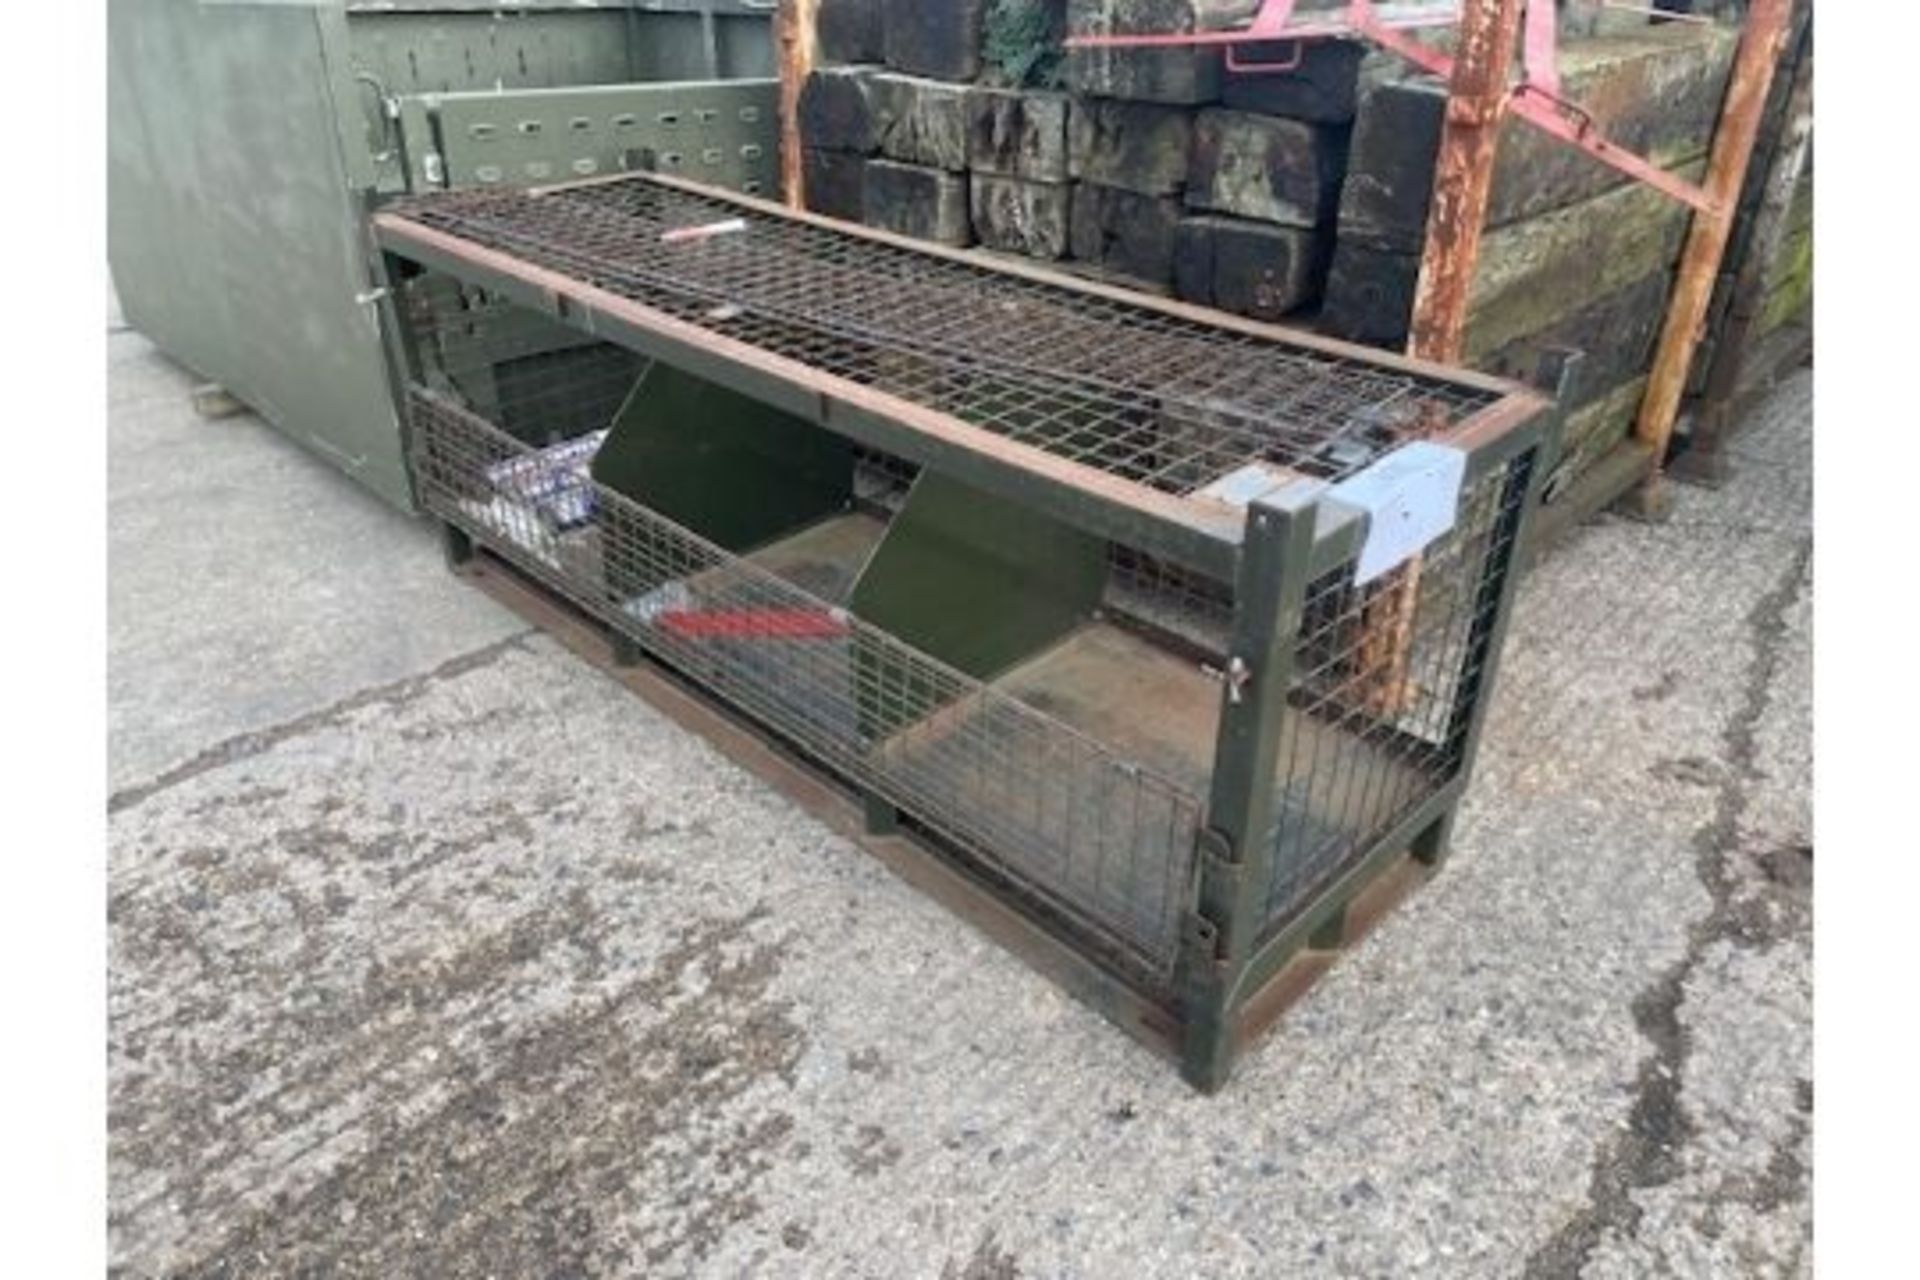 MOD STACKING SPARE PARTS STILLAGE 6FT X 2FT X 3FT - Image 2 of 3